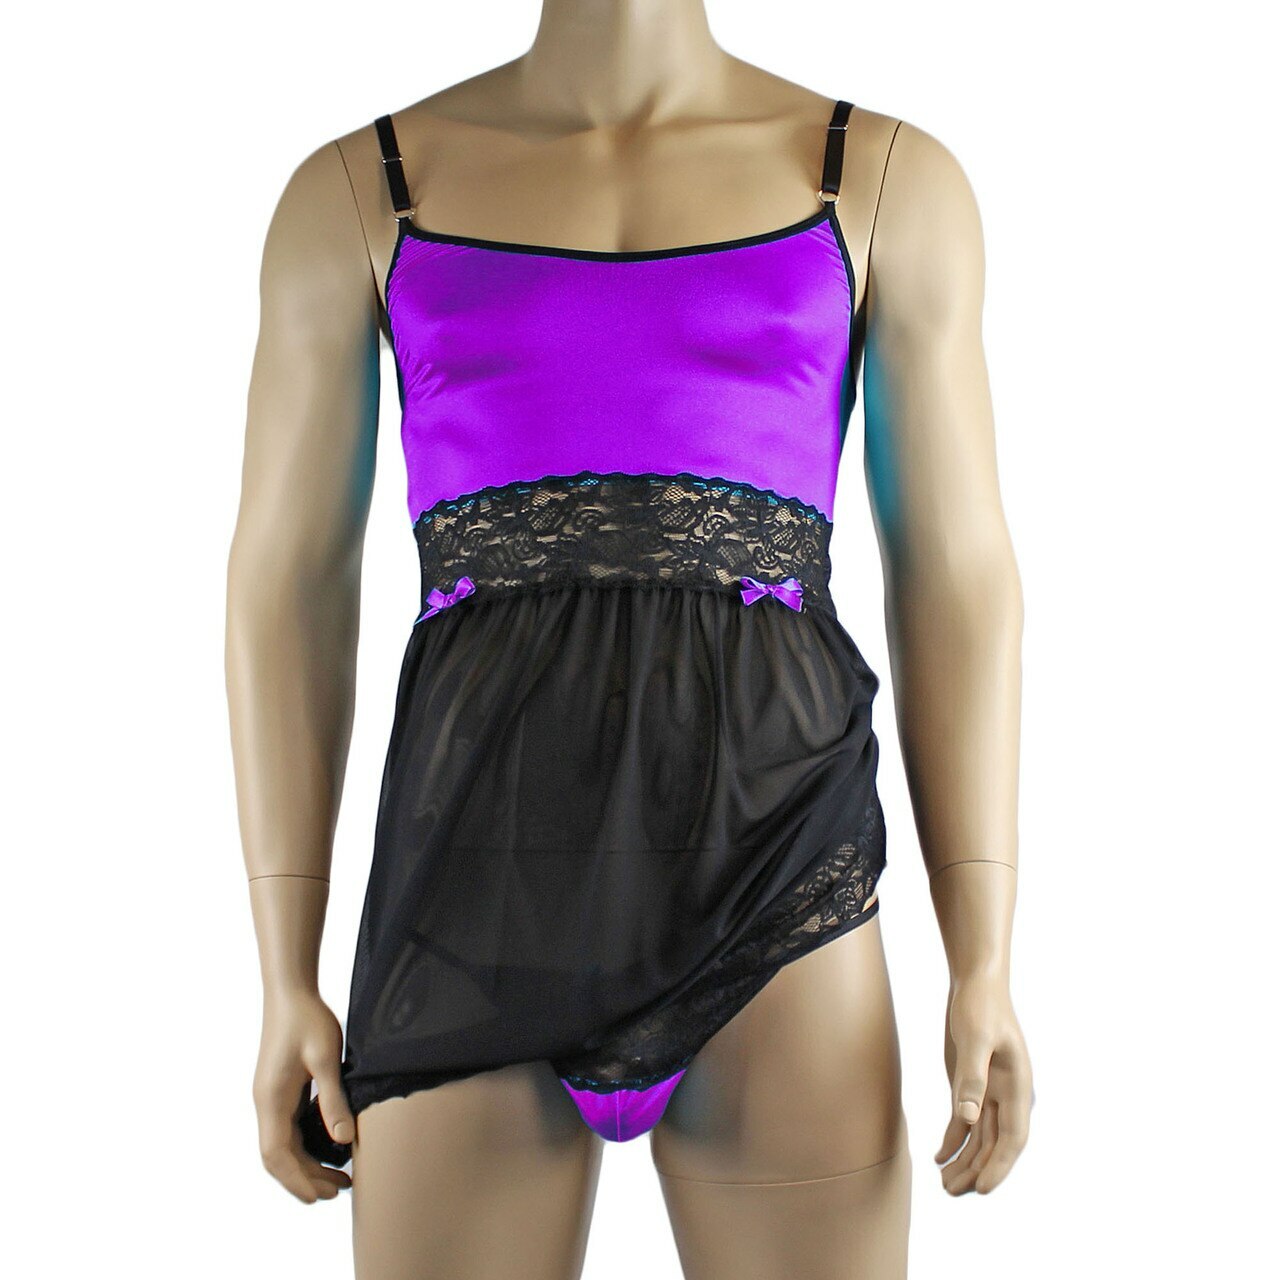 Mens Joanne Sexy Lingerie Nightwear Chemise with G string - Sizes up to 3XL Purple & Black